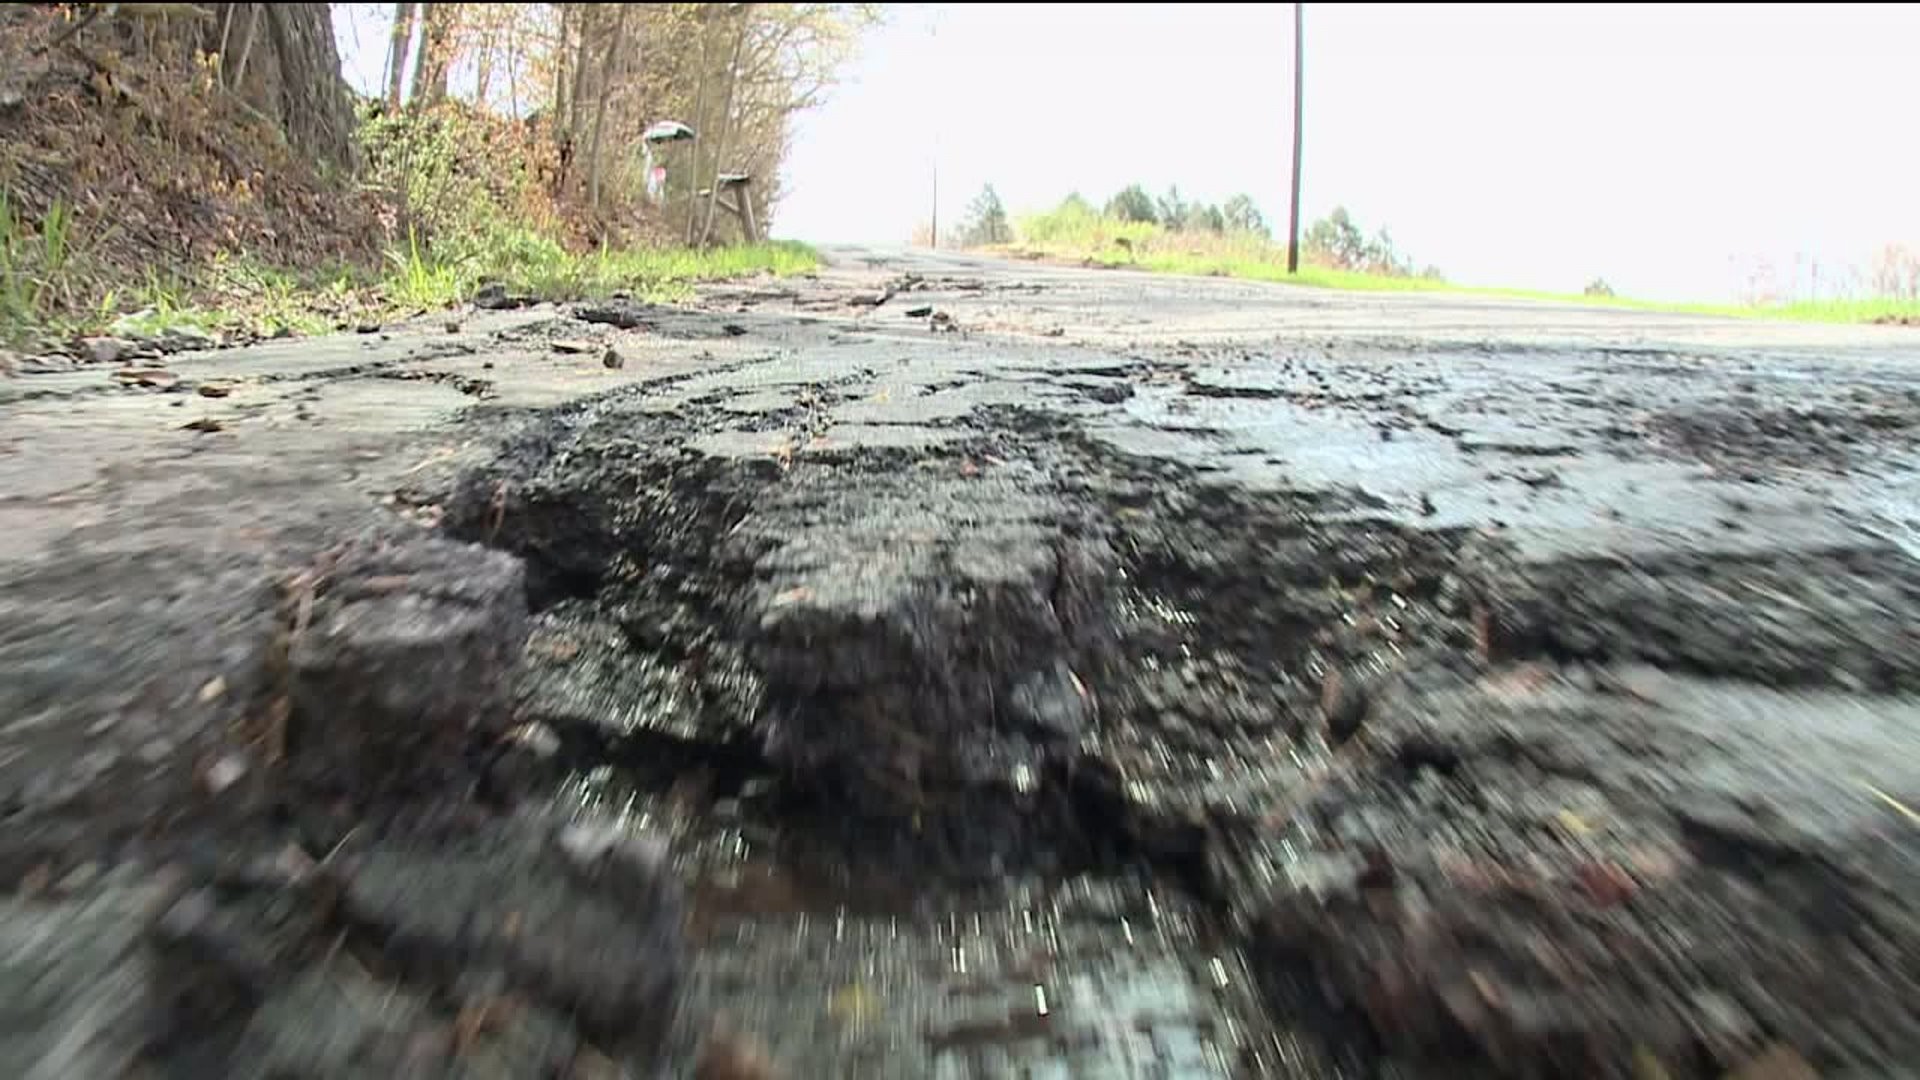 Concern over Condition of Roads in Wayne County